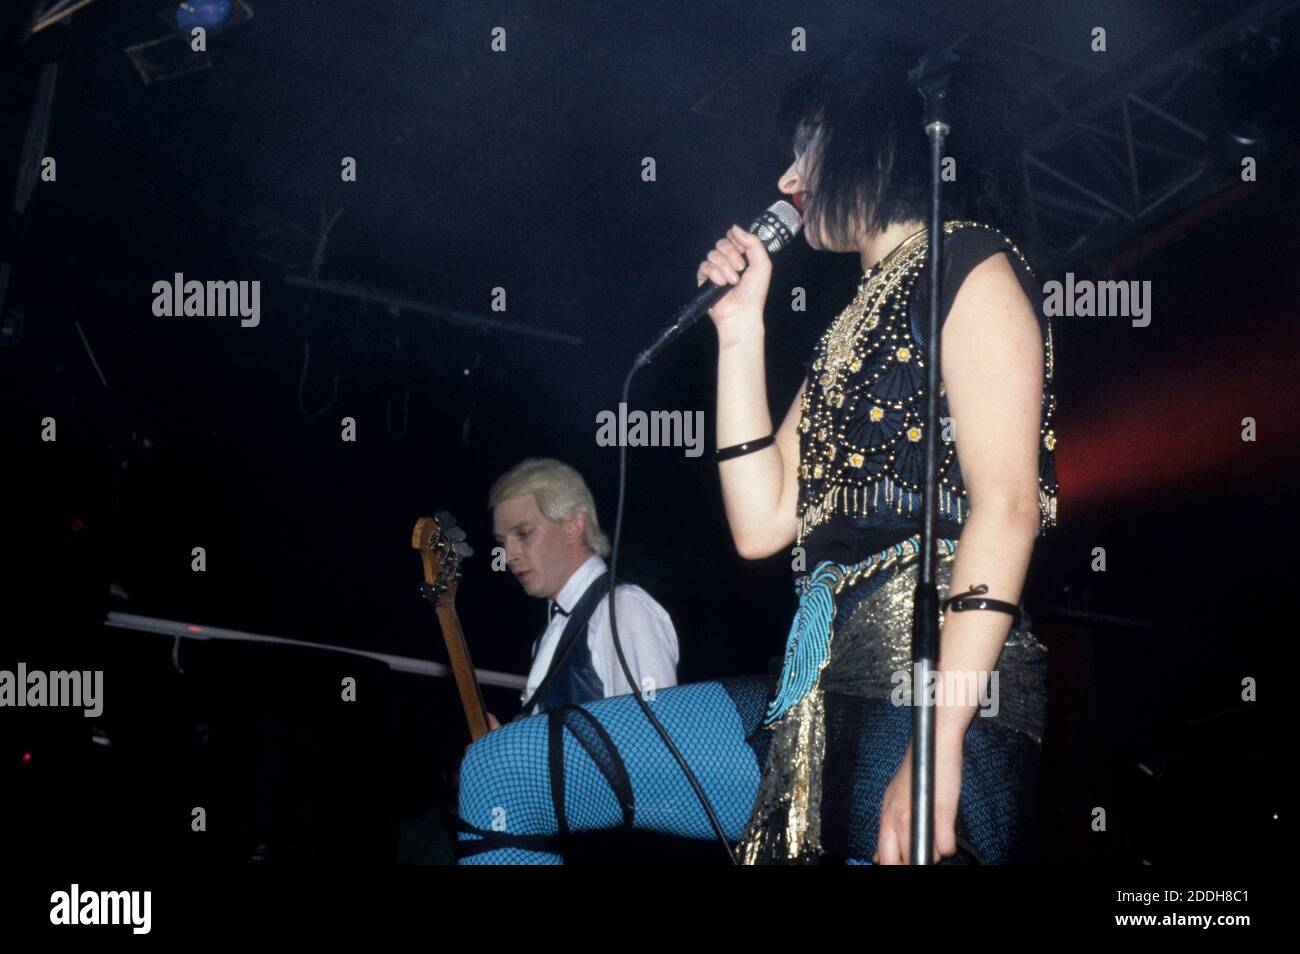 Steve Severin And Siouxsie Sioux From Siouxsie And The Banshees Live At The Hammerswithh Palais